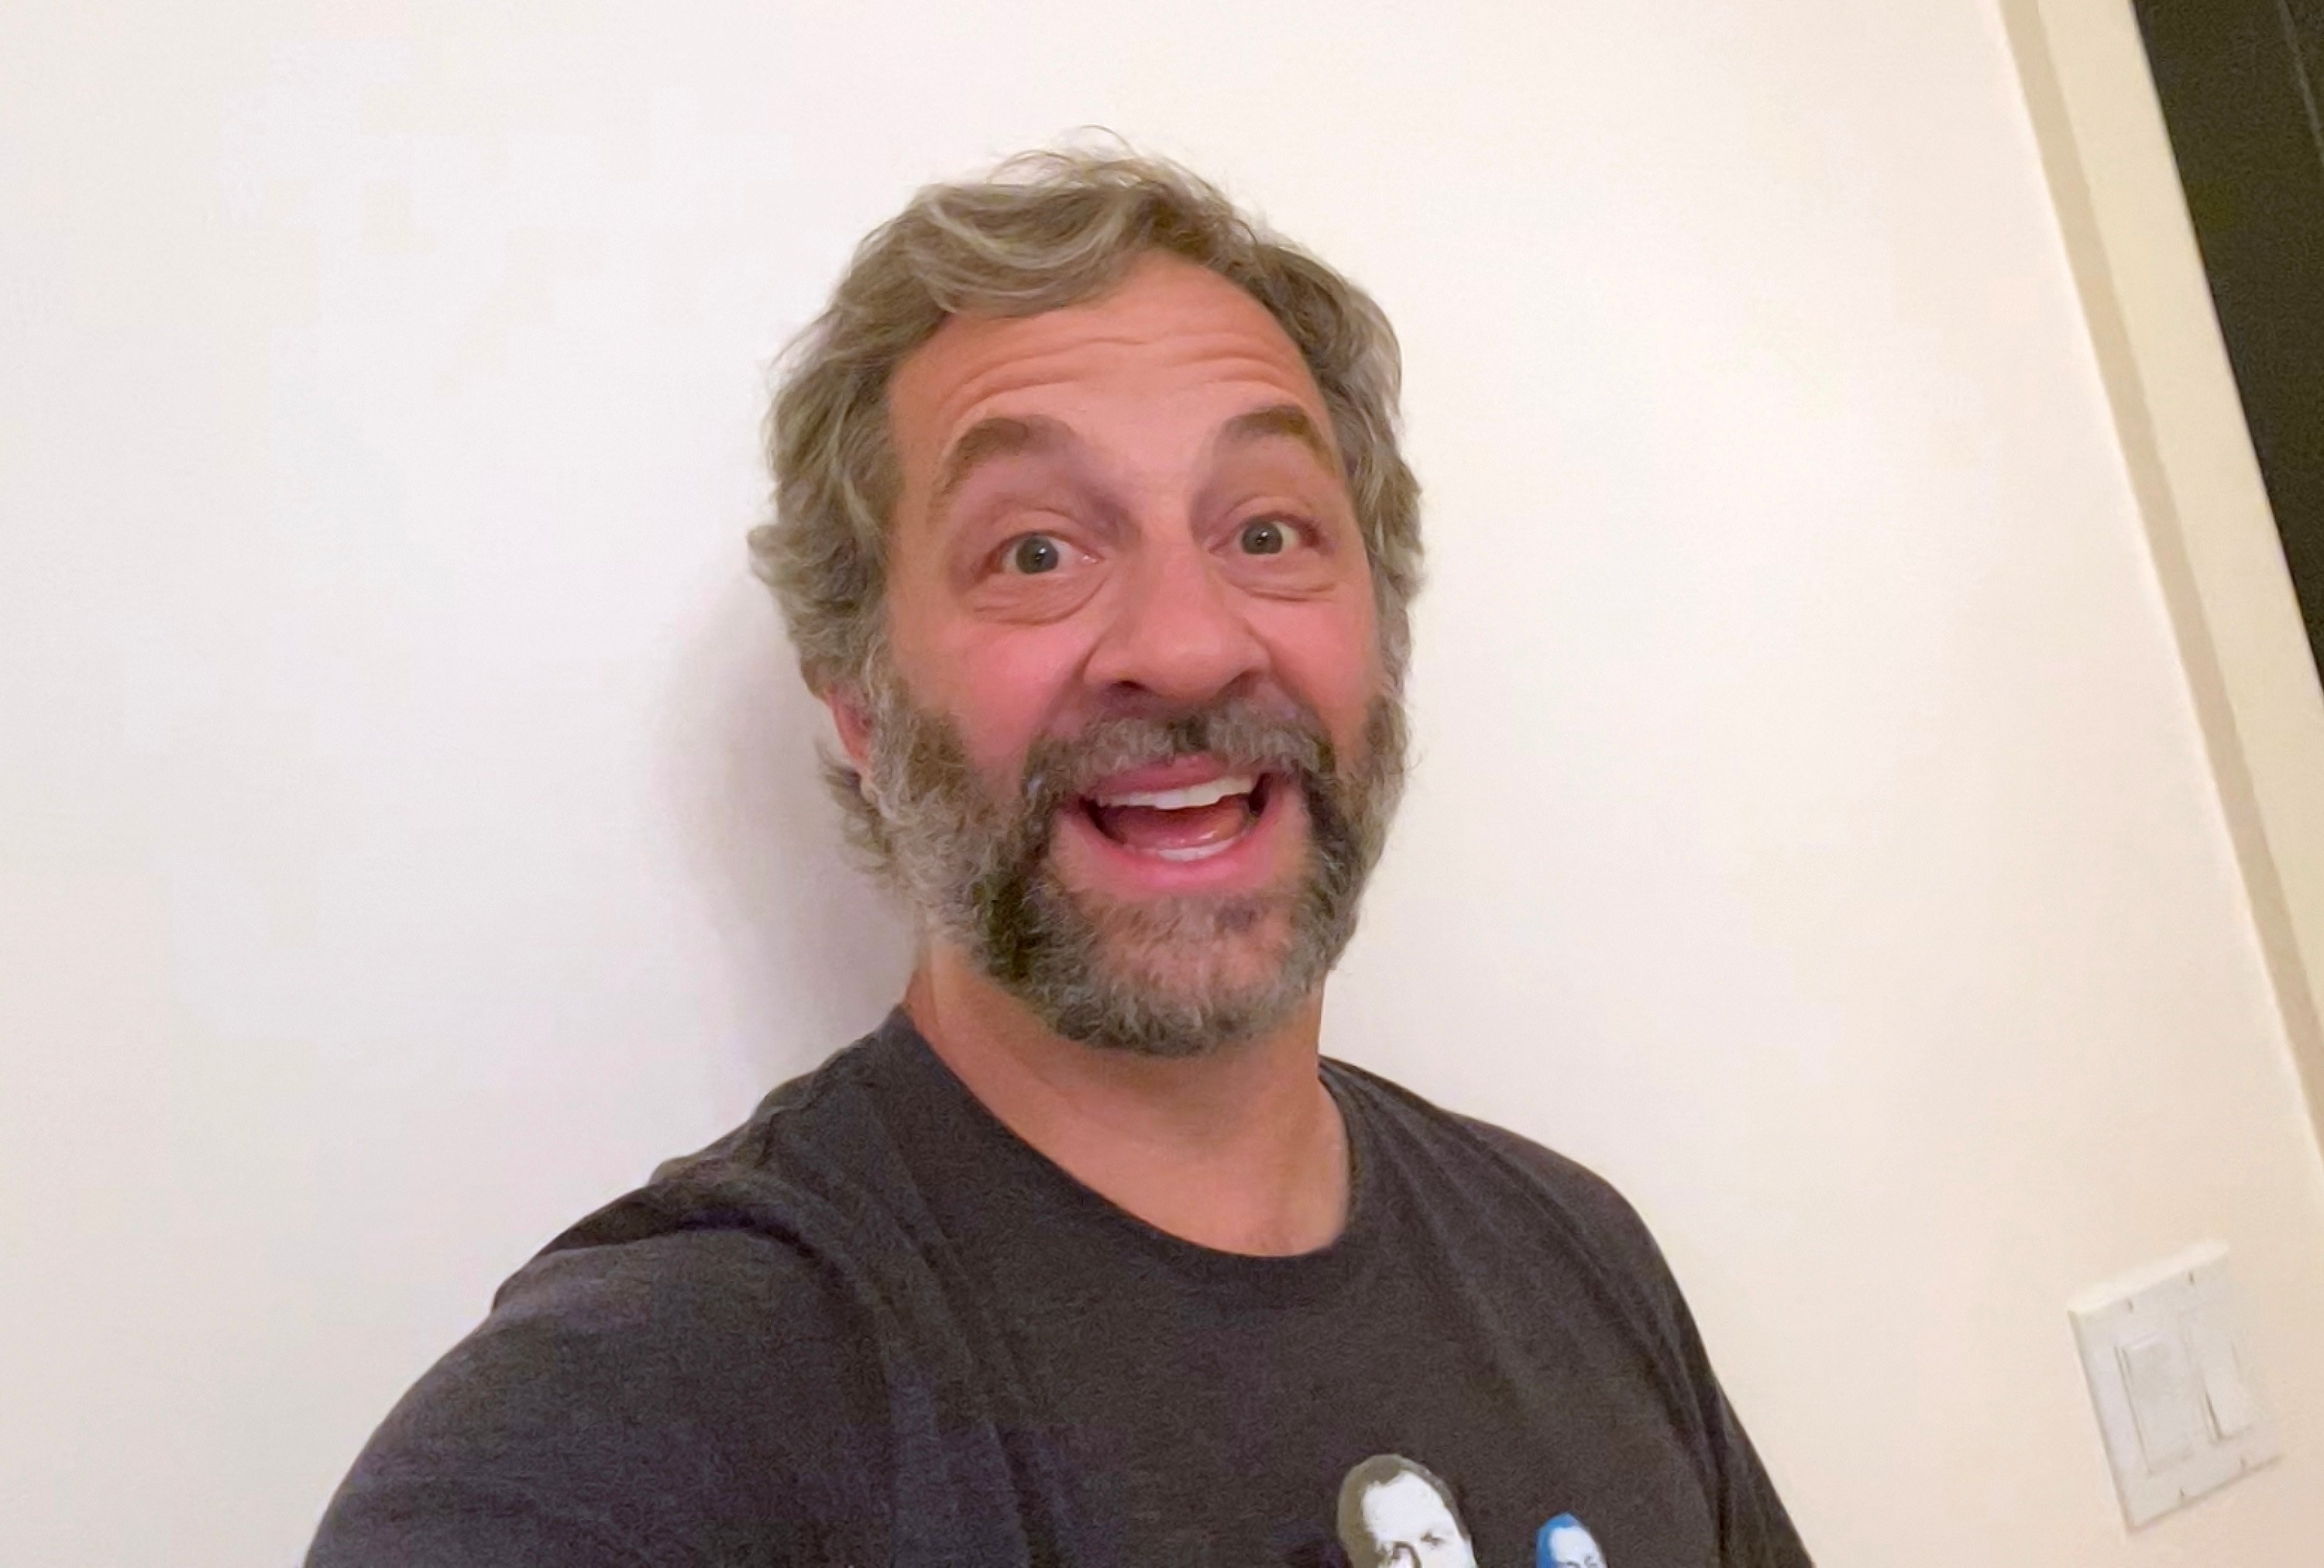 Director Judd Apatow, who worked on 'Freaks and Geeks' in 1999